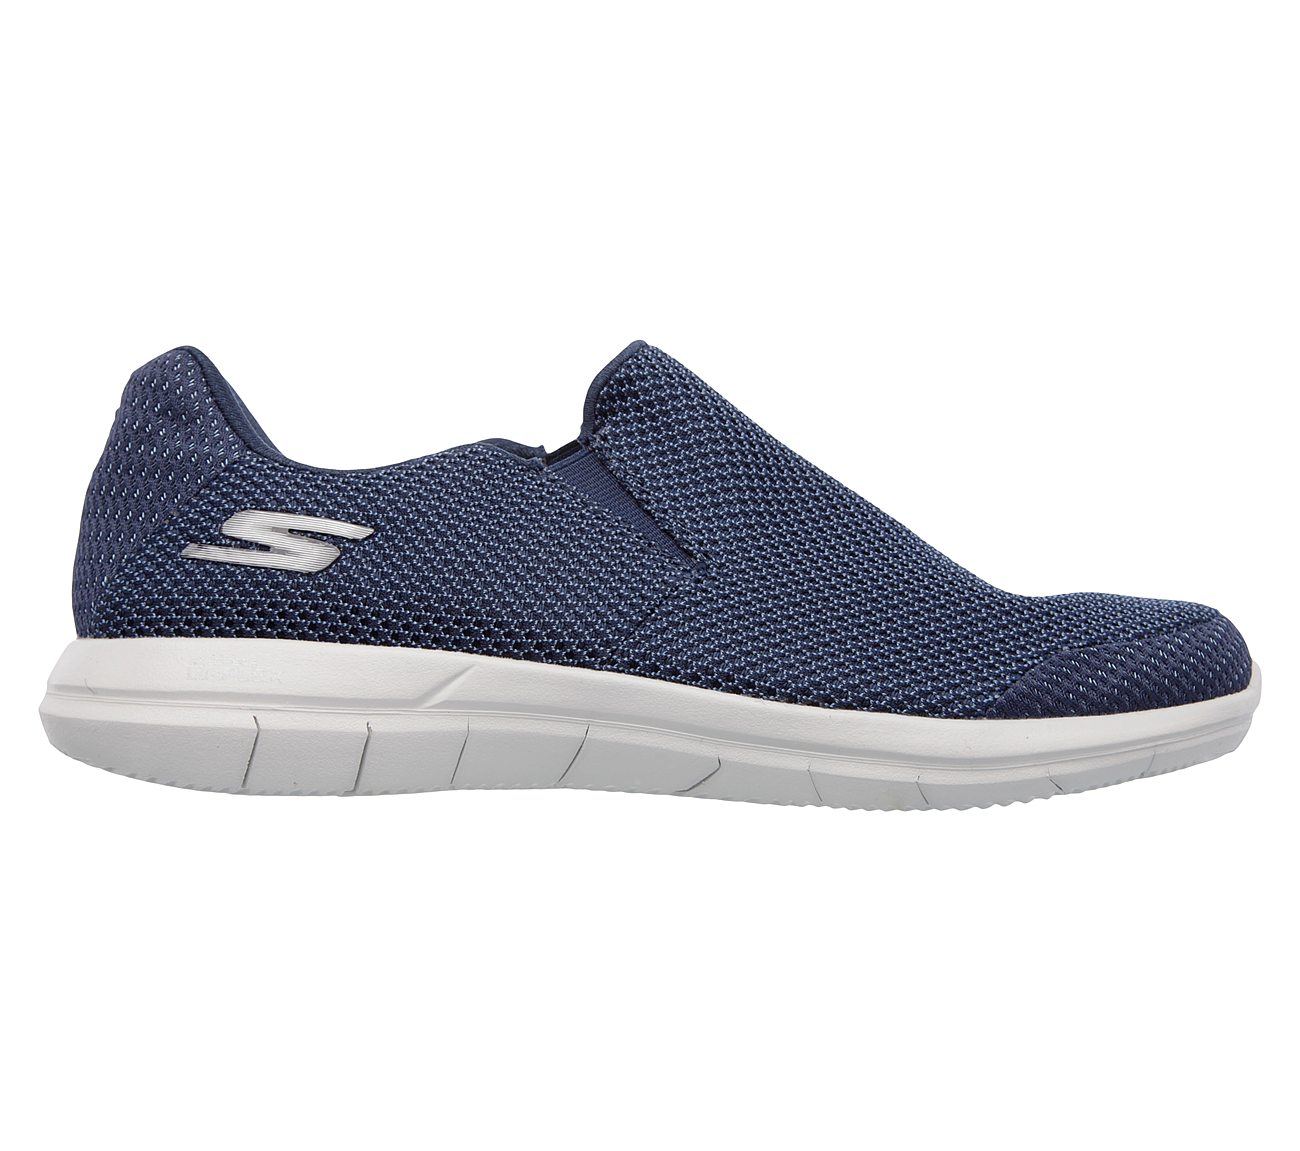 Infuse Skechers Performance Shoes